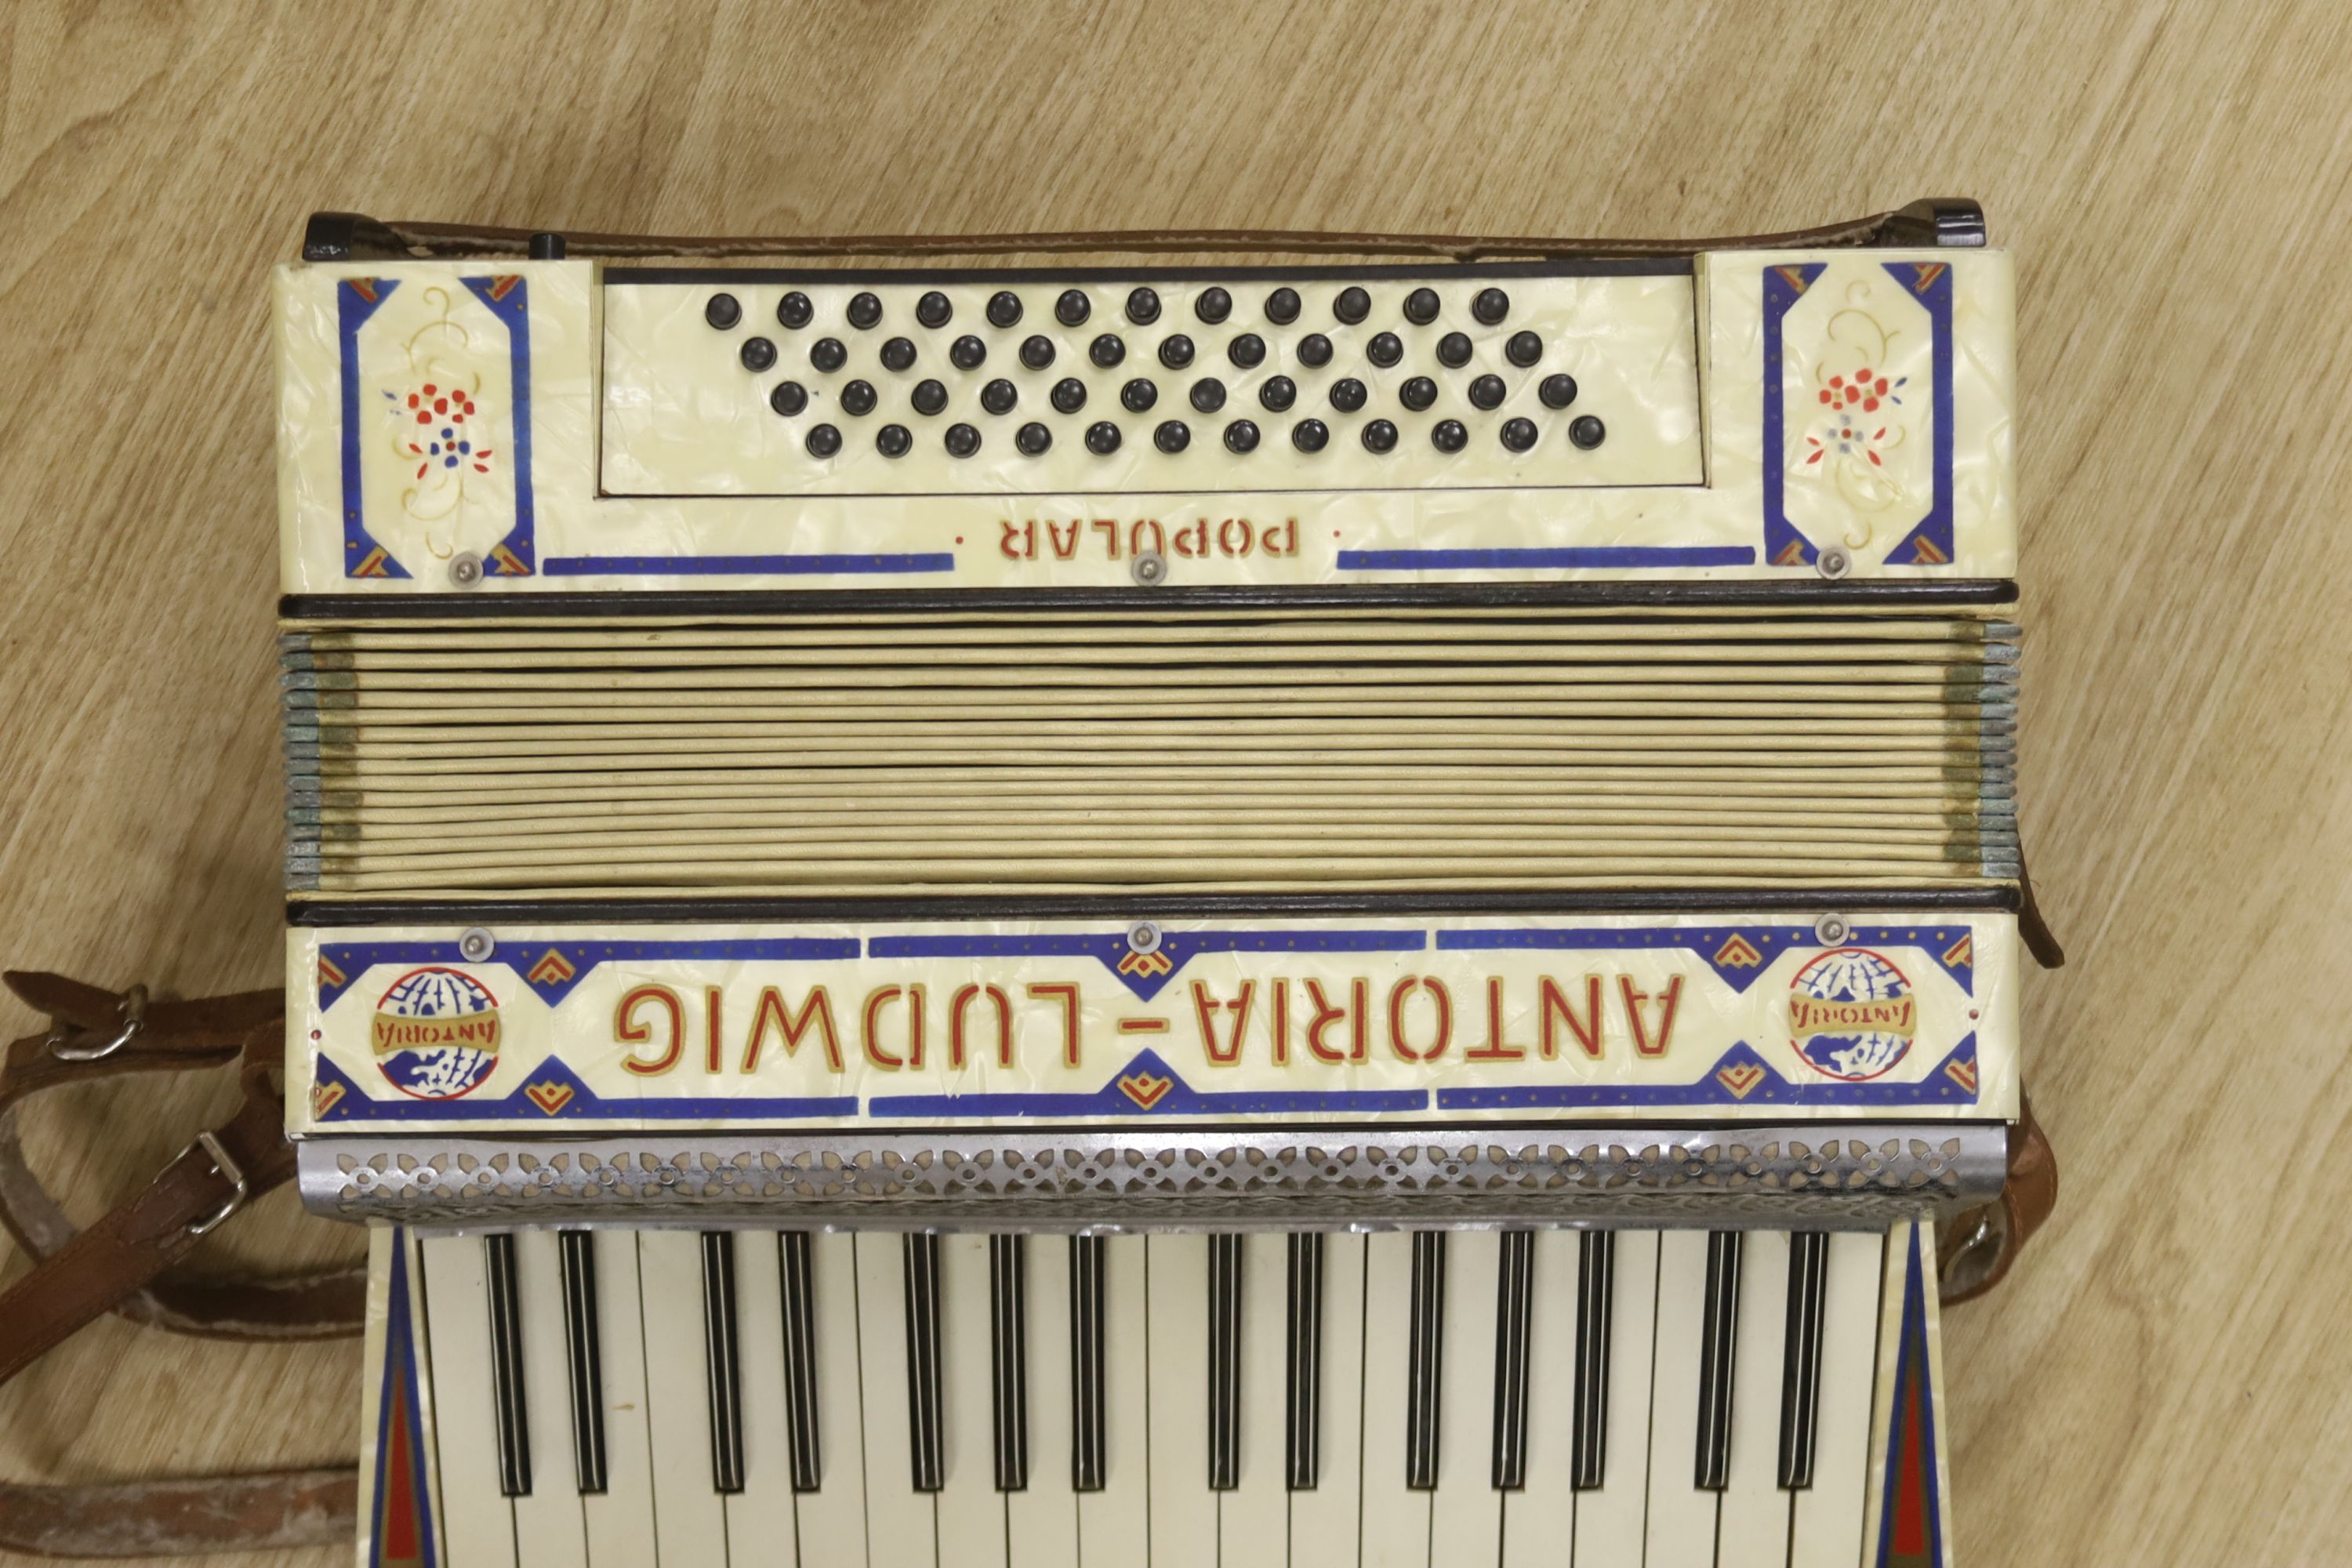 A cased Antoria Ludwig accordian, cased - Image 3 of 4